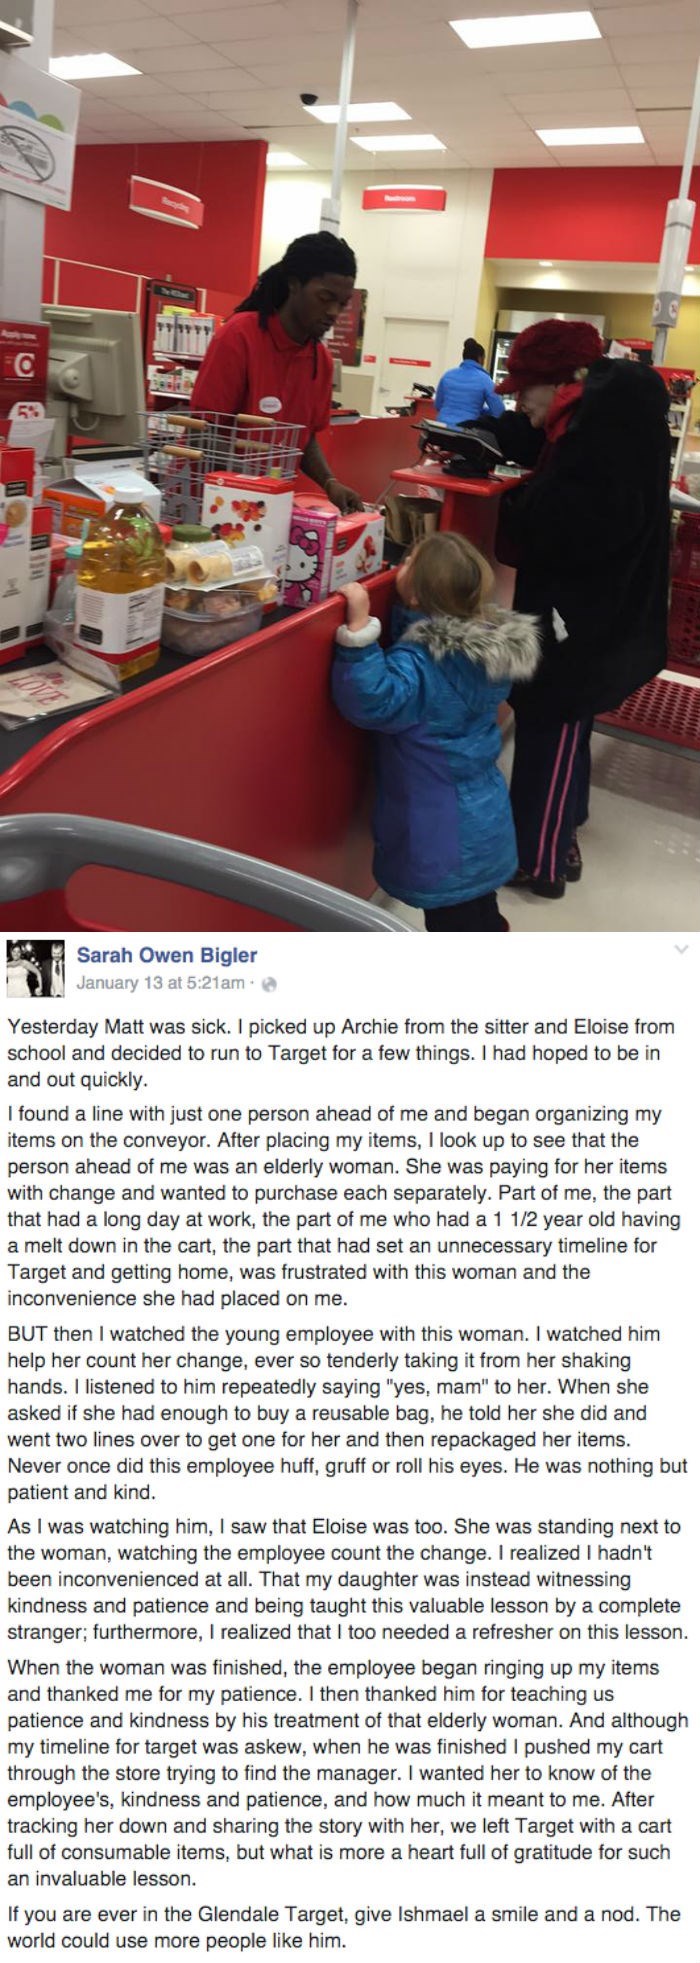 heartwarming parenting image mother tells story of patience from Target employee